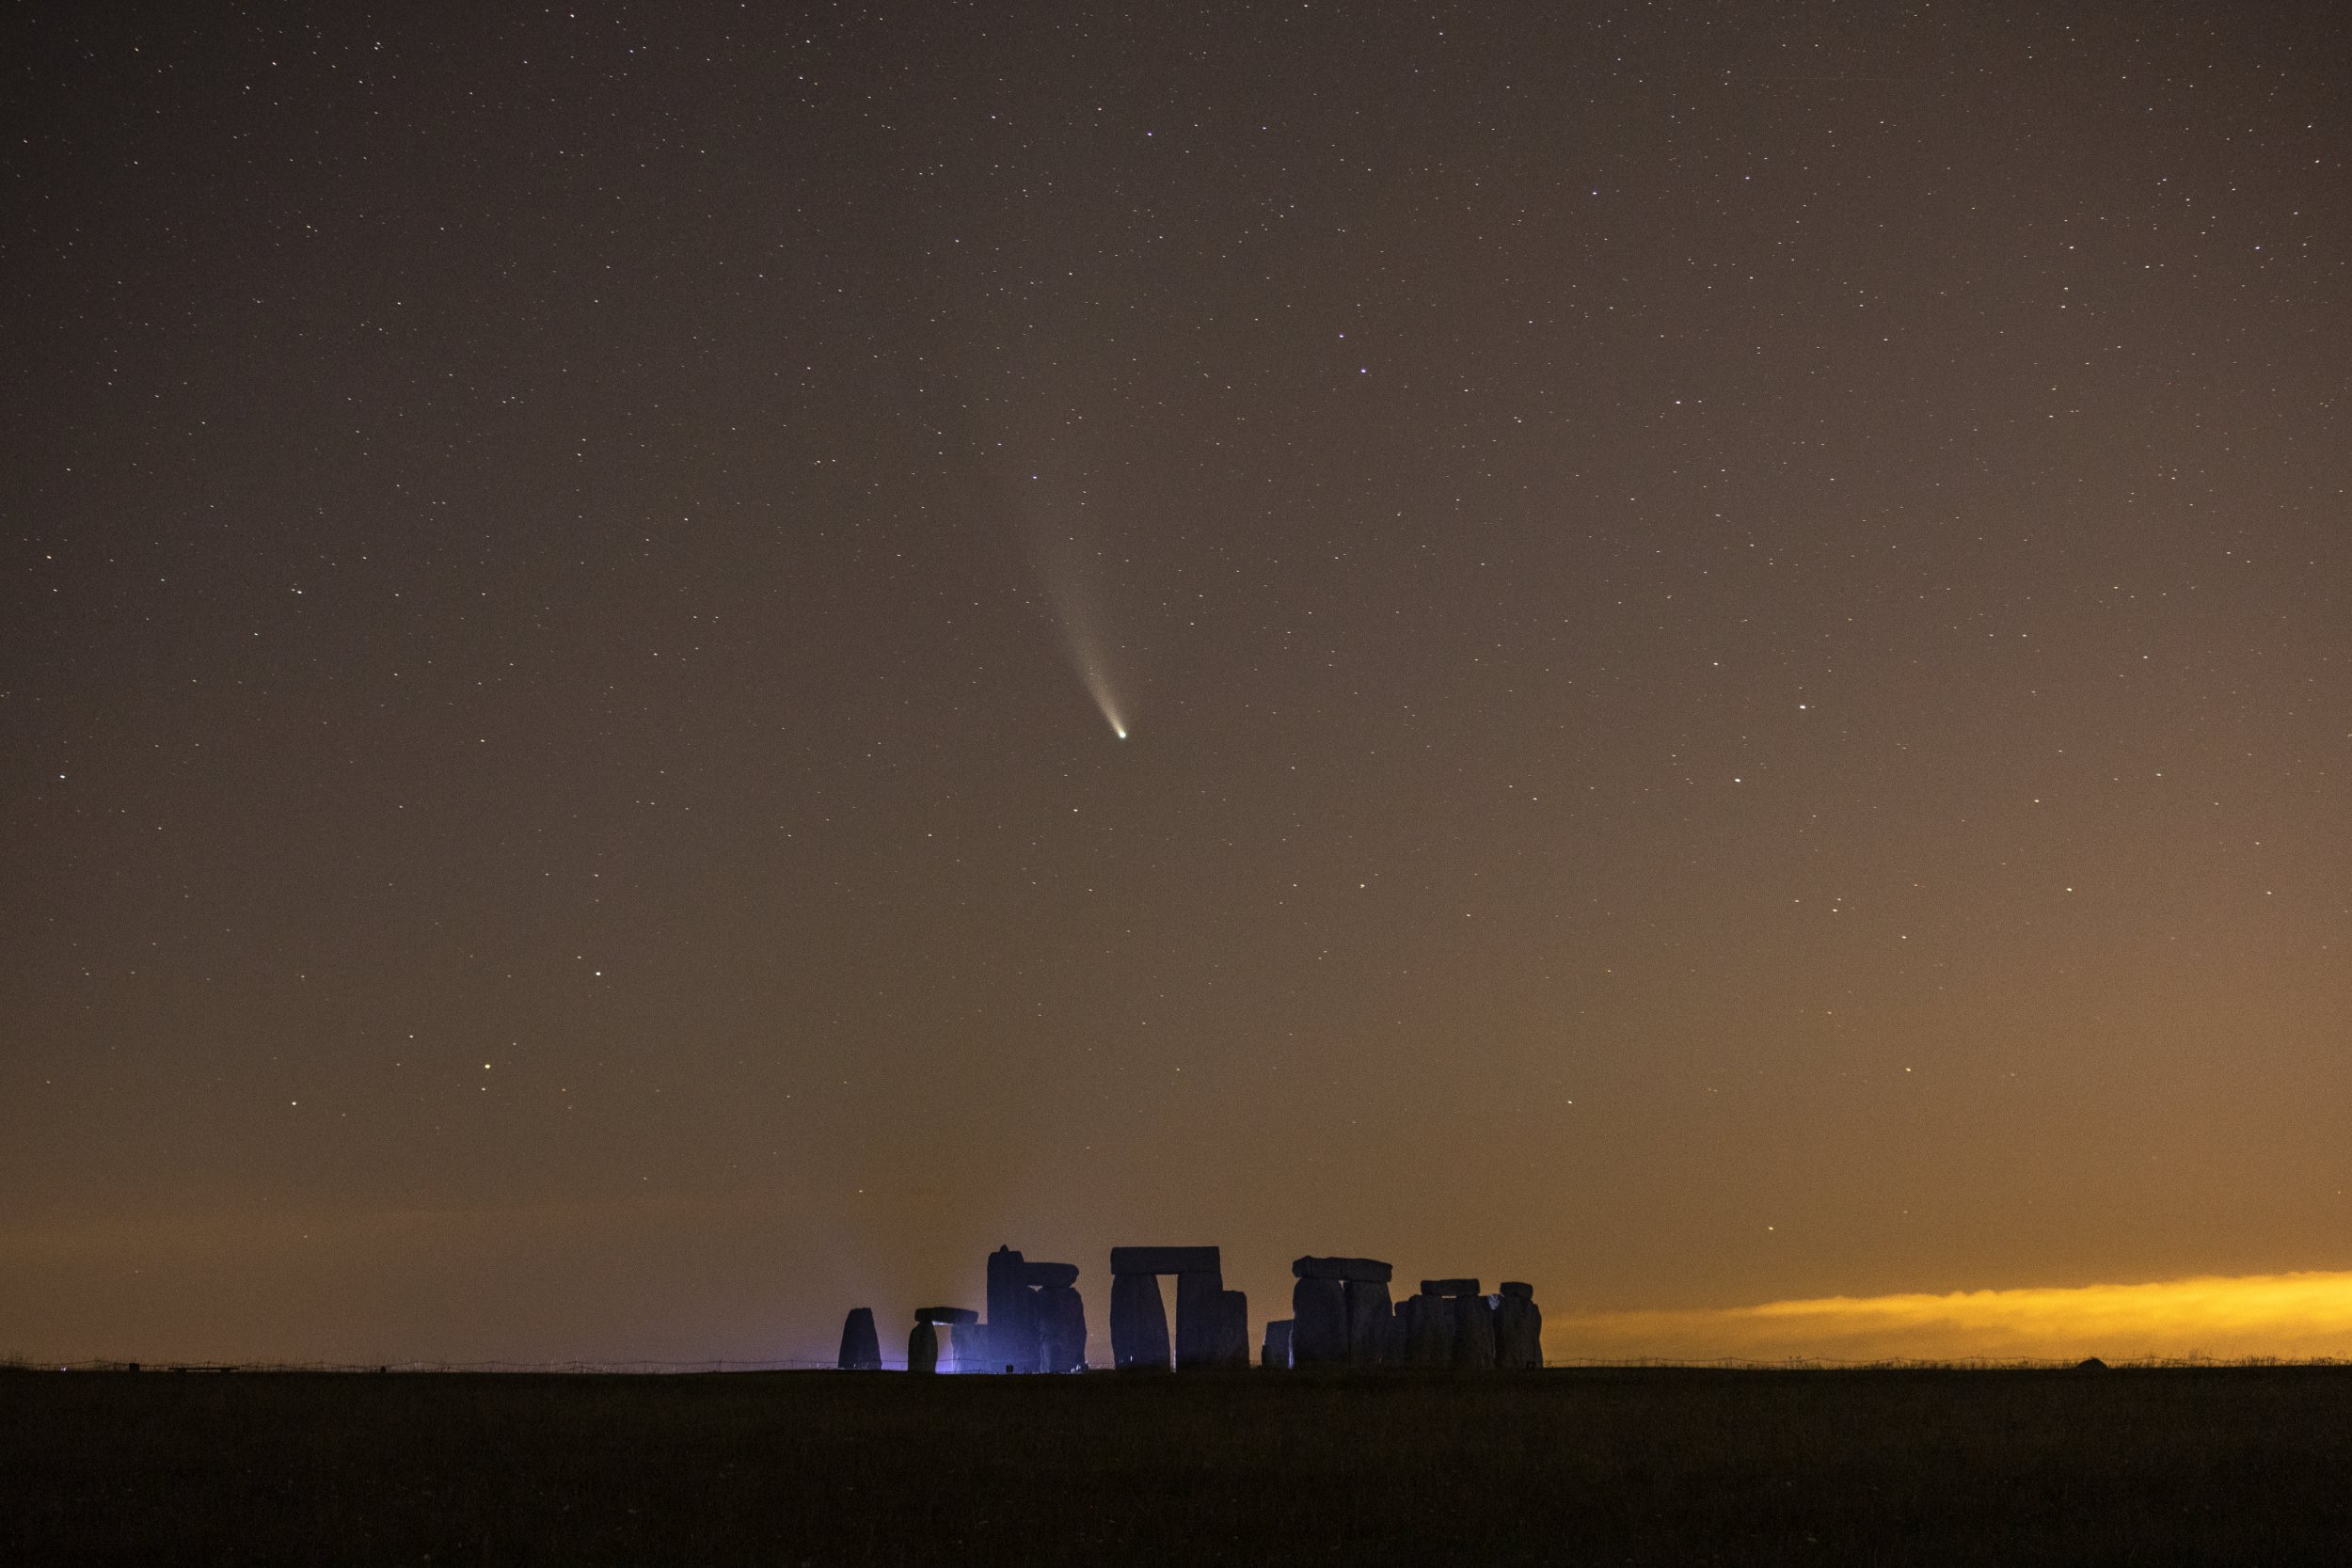 European Best Pictures Of The Day - July 21 - SALISBURY, ENGLAND - JULY 21: Comet NEOWISE passes over Stonehenge in the early hours of July 21, 2020 in Salisbury, England. Comet NEOWISE, the brightest seen in the Northern Hemisphere in 25 years, was discovered by Nasas Near-Earth Object Wide-field Infrared Survey Explorer (NEOWISE) mission on March 27. The comet is currently visible after sunset and will have its closest encounter with Earth on July 23 when it will be around 64 million miles away. (Photo by Dan Kitwood/Getty Images)